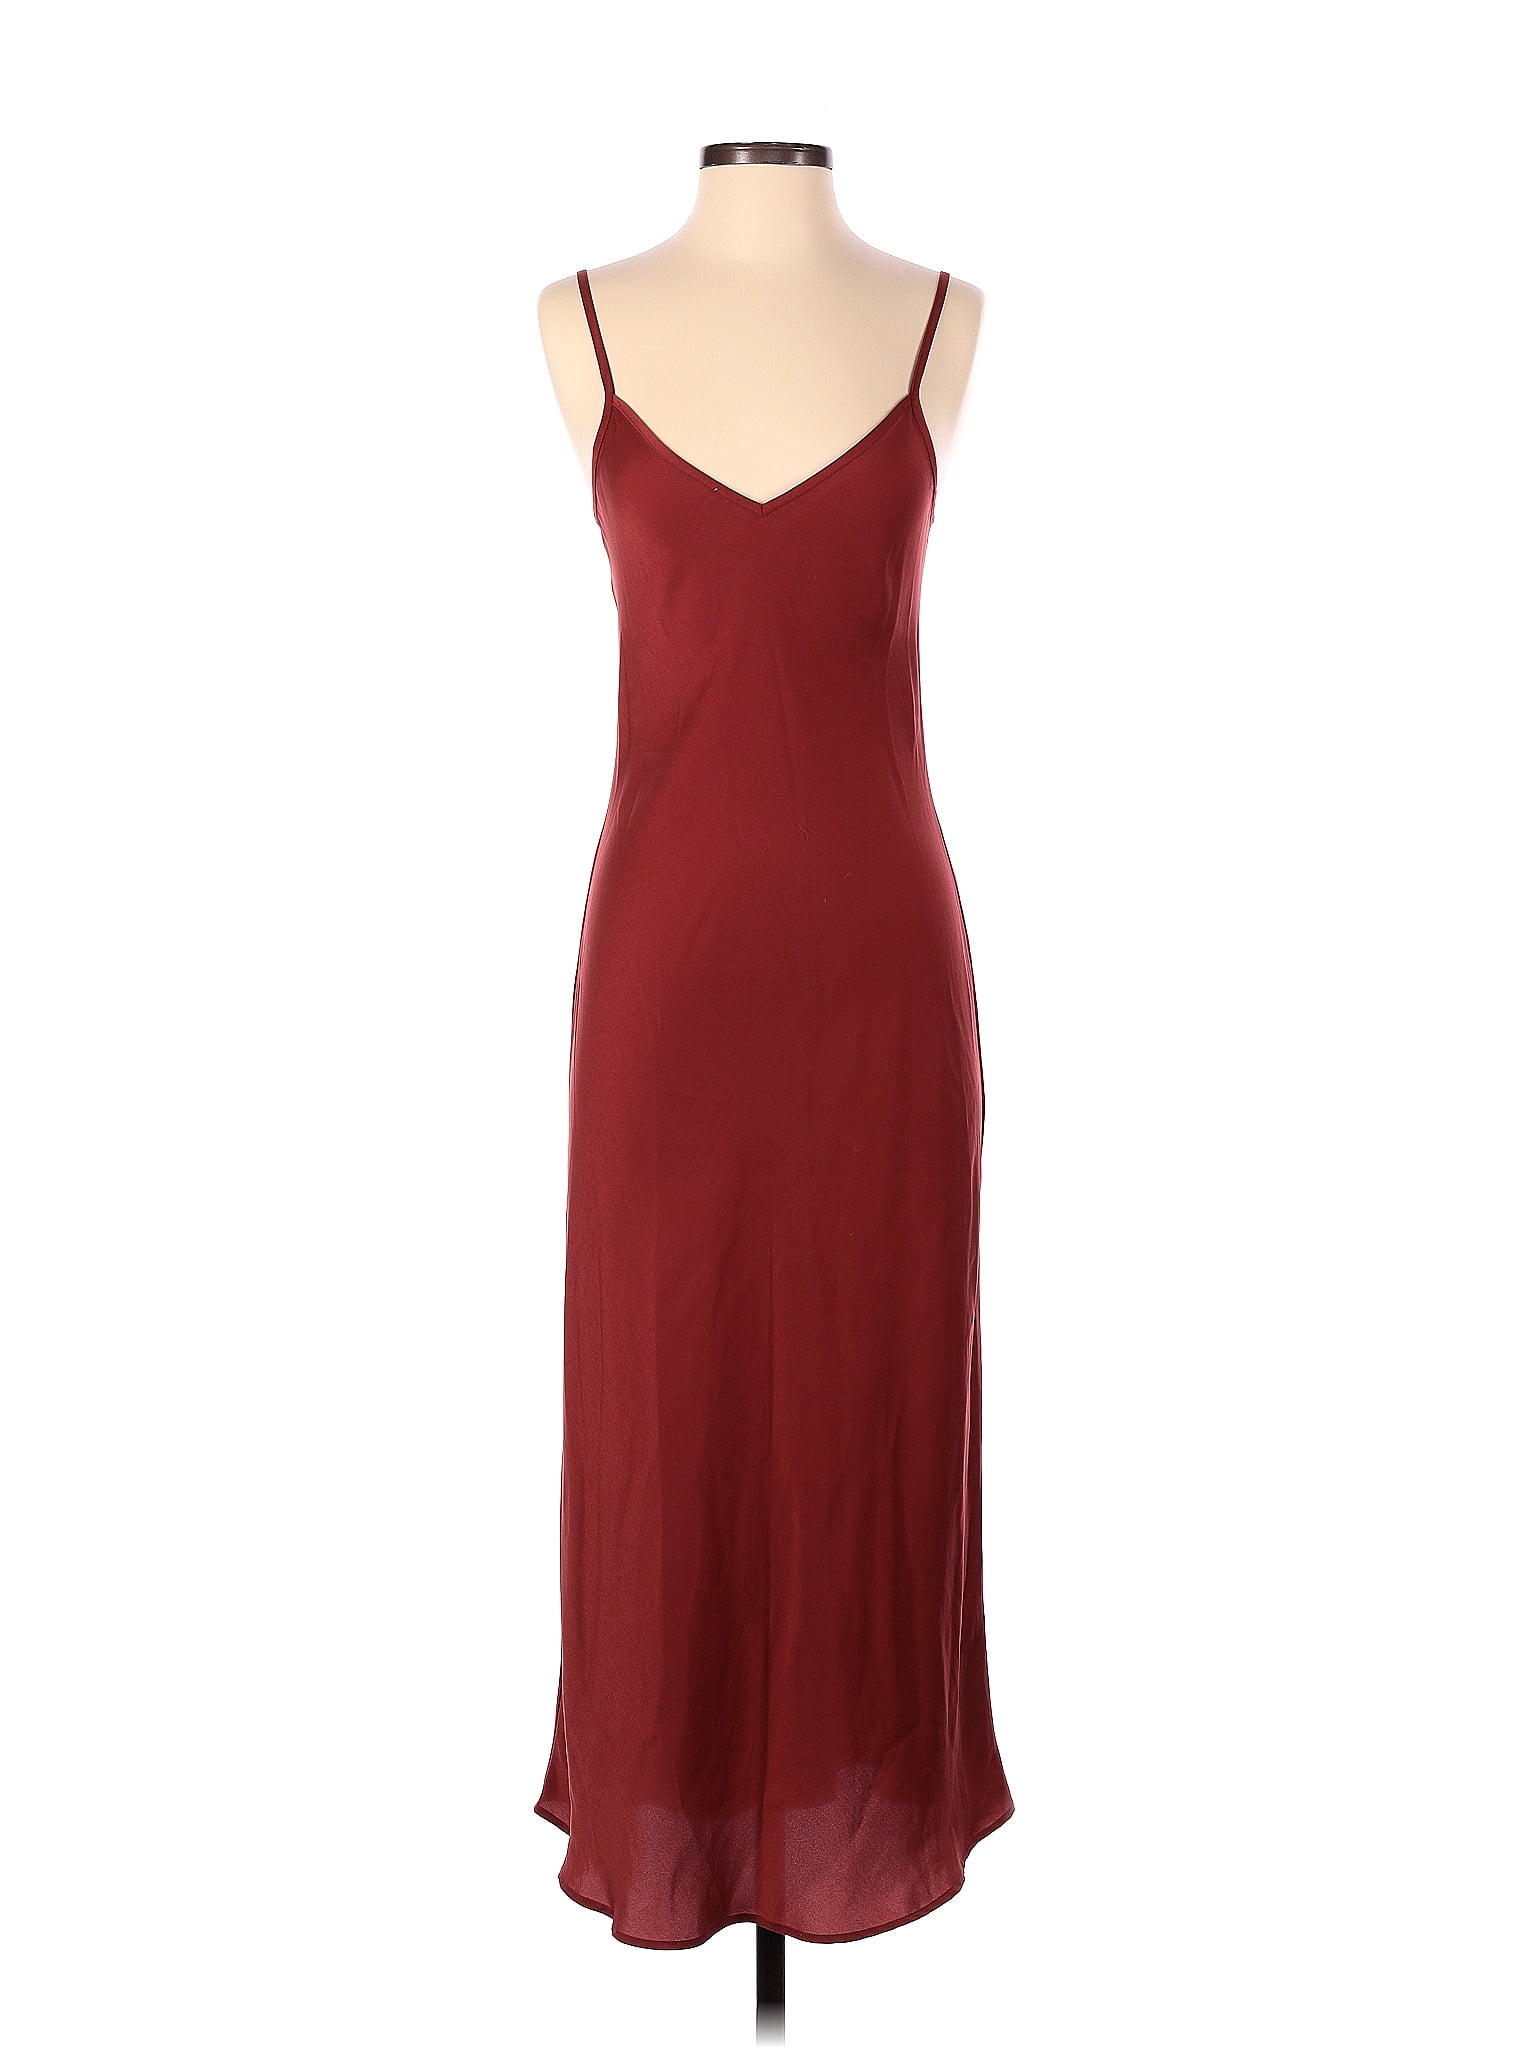 ALLSAINTS 100% Polyester Solid Maroon Burgundy Cocktail Dress Size S ...